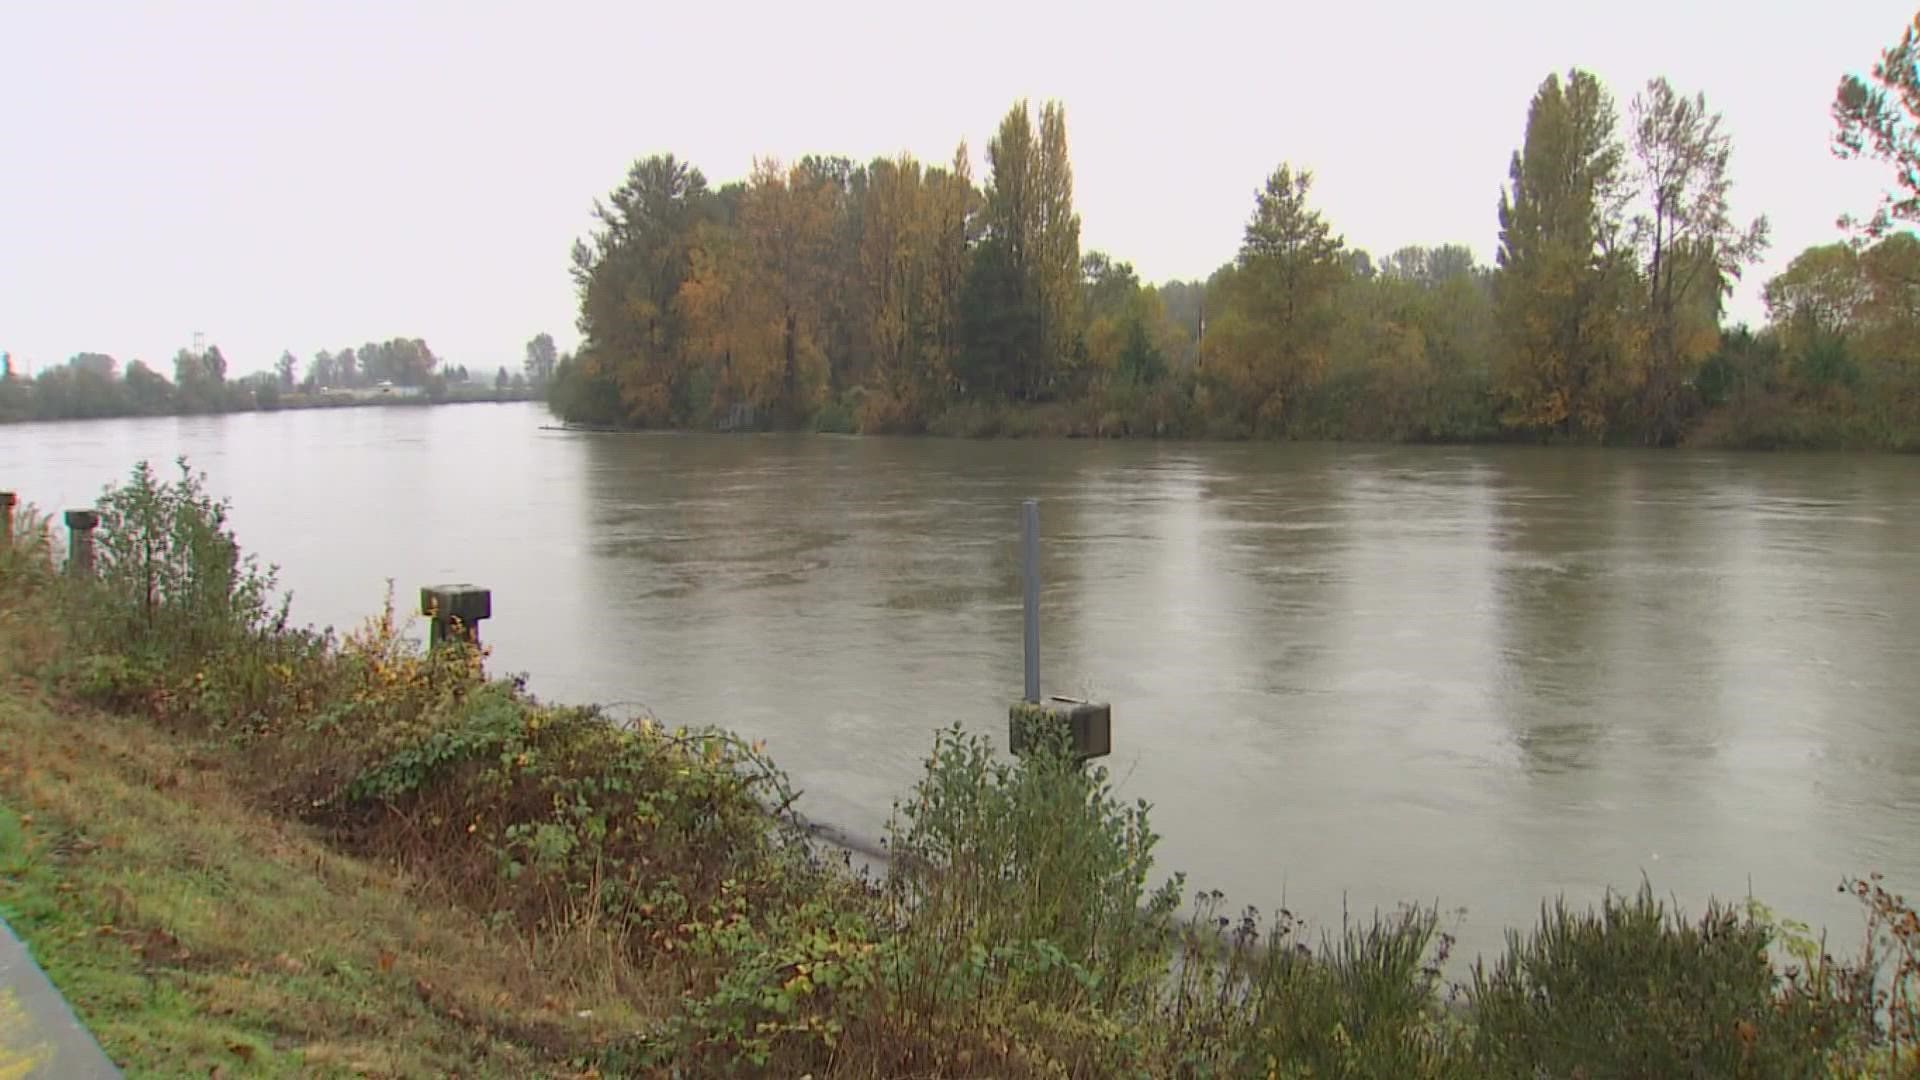 In Mount Vernon, the Skagit River is expected to crest at 31 feet. Major flood stage is 32 feet.